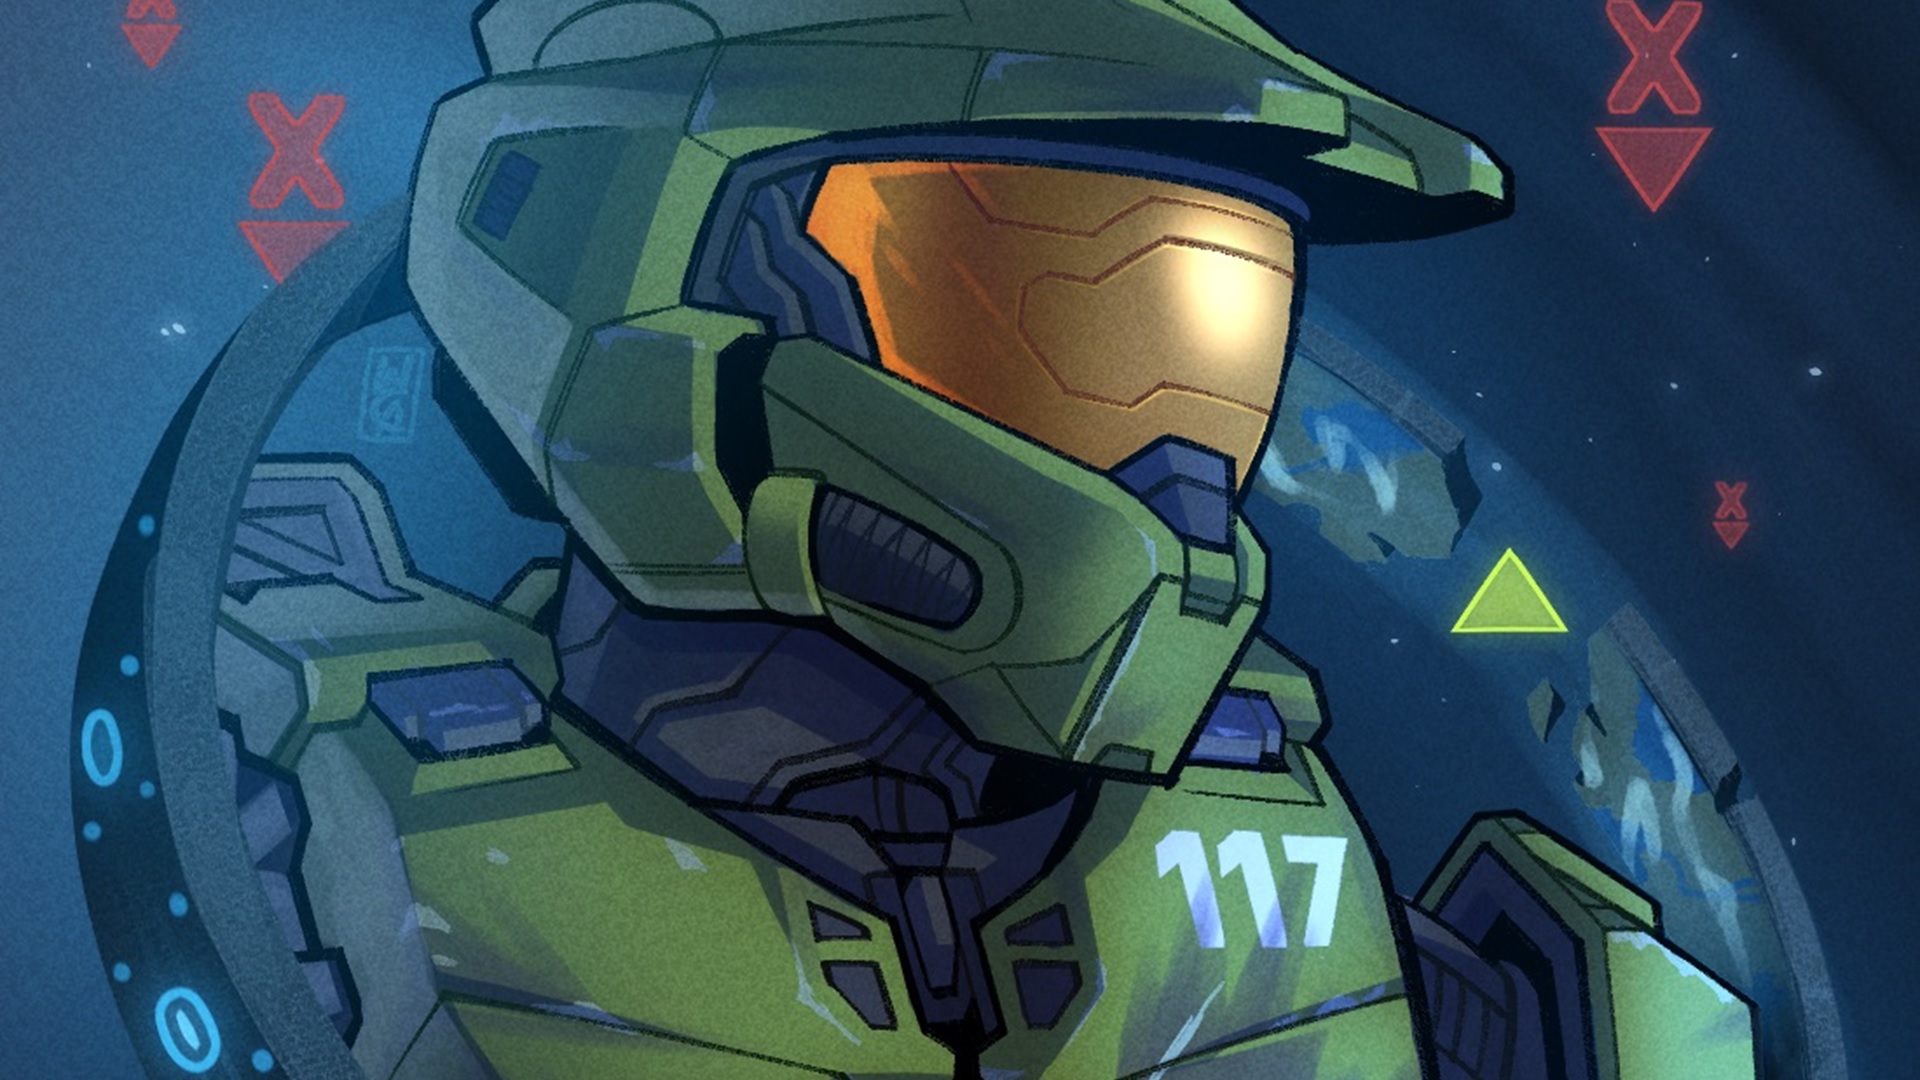 Community Corner 008 header image showing art of the Master Chief and Zeta Halo by Will Clements